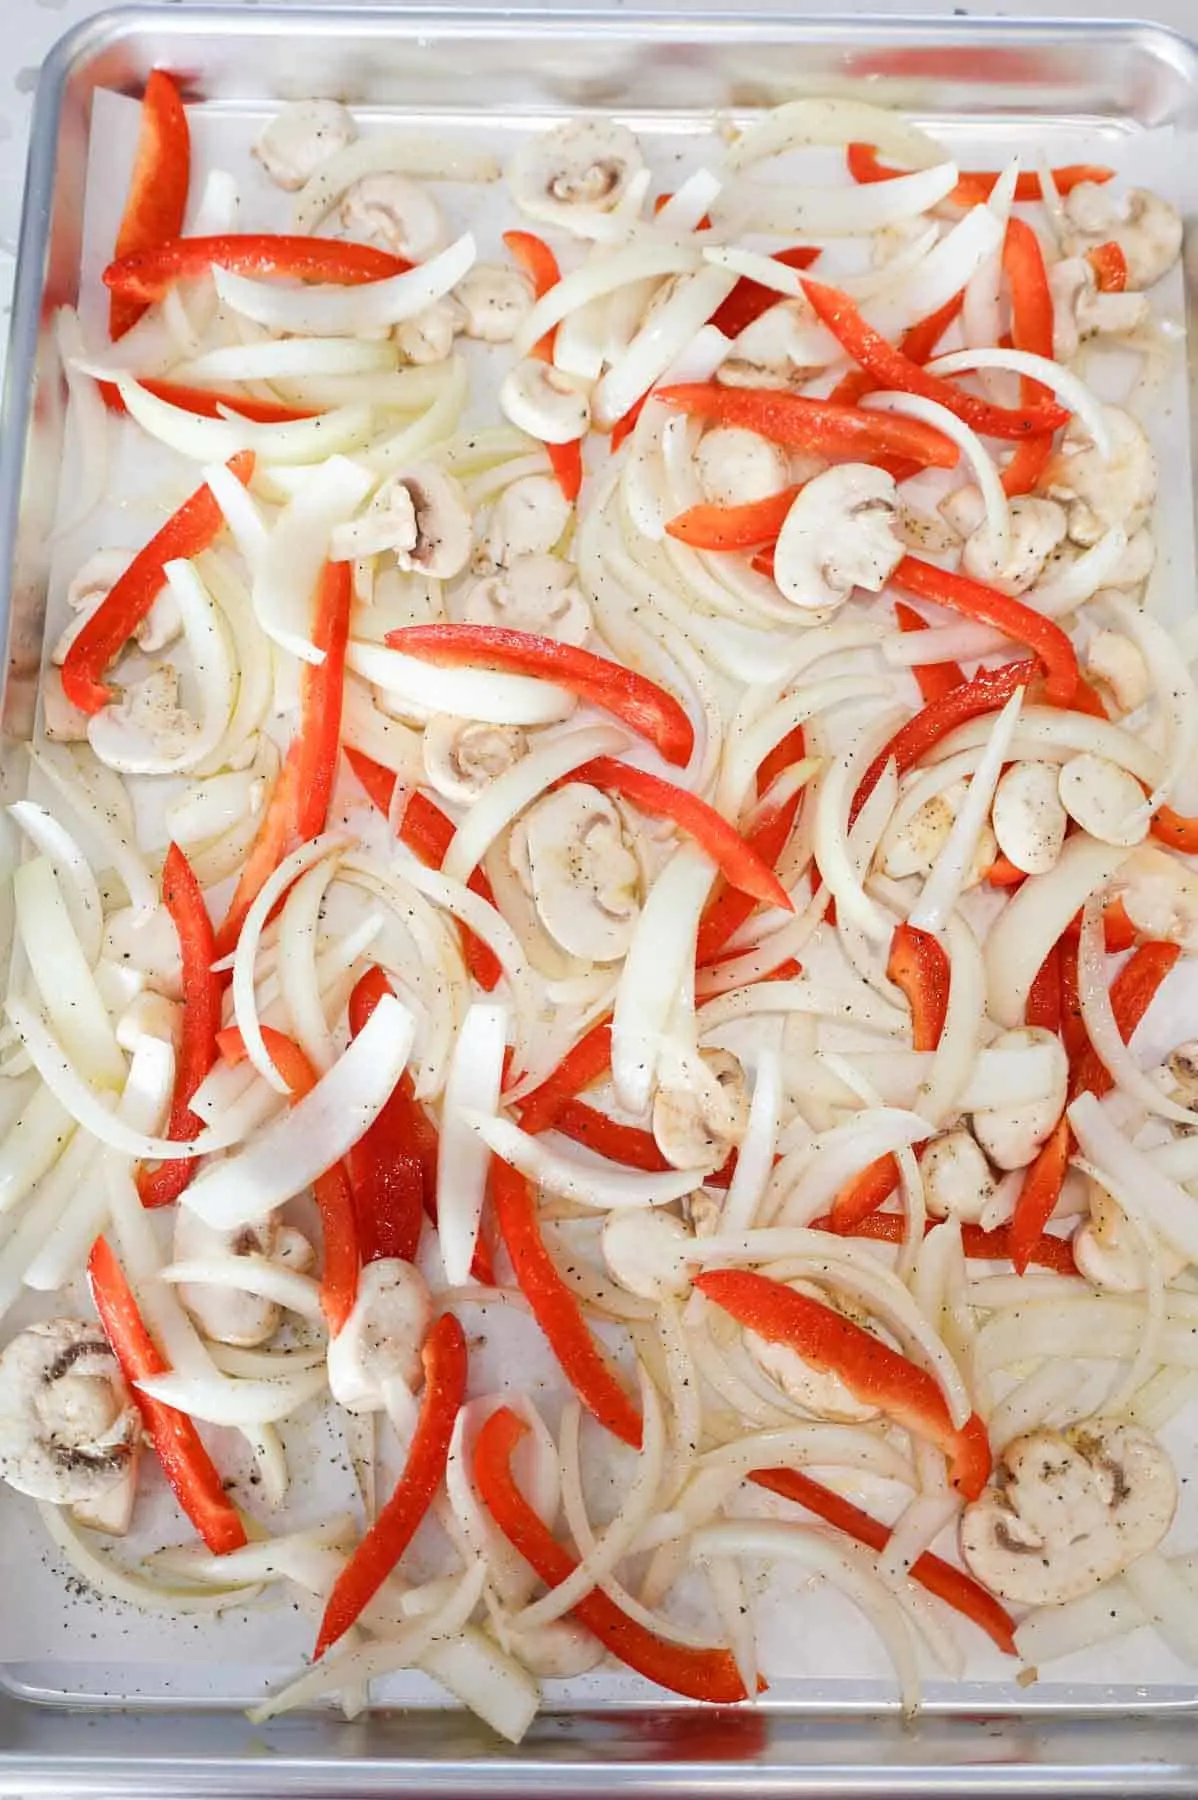 seasoned sliced mushrooms, red bell peppers and onions on a parchment lined baking sheet